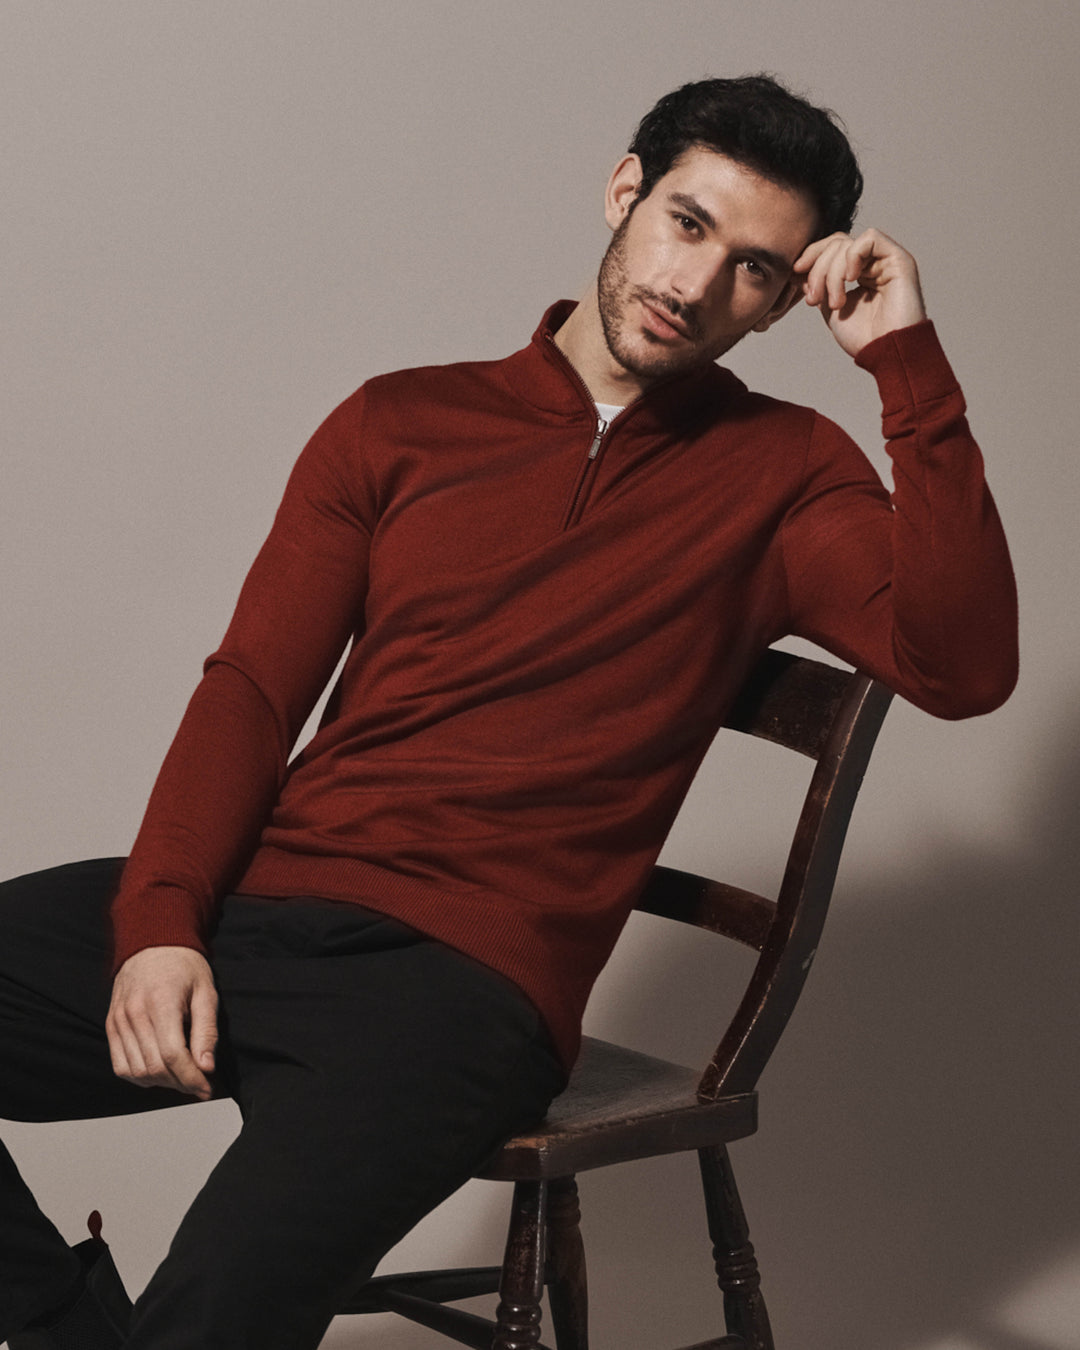 Our extra-fine merino wool 1/4 zip jumpers for men and women in maroon red are made from a lightweight fabric and reactive natural fibre. Ideal for layering under our waterproof dry robes for spectating touchdown sports or walking the dog.